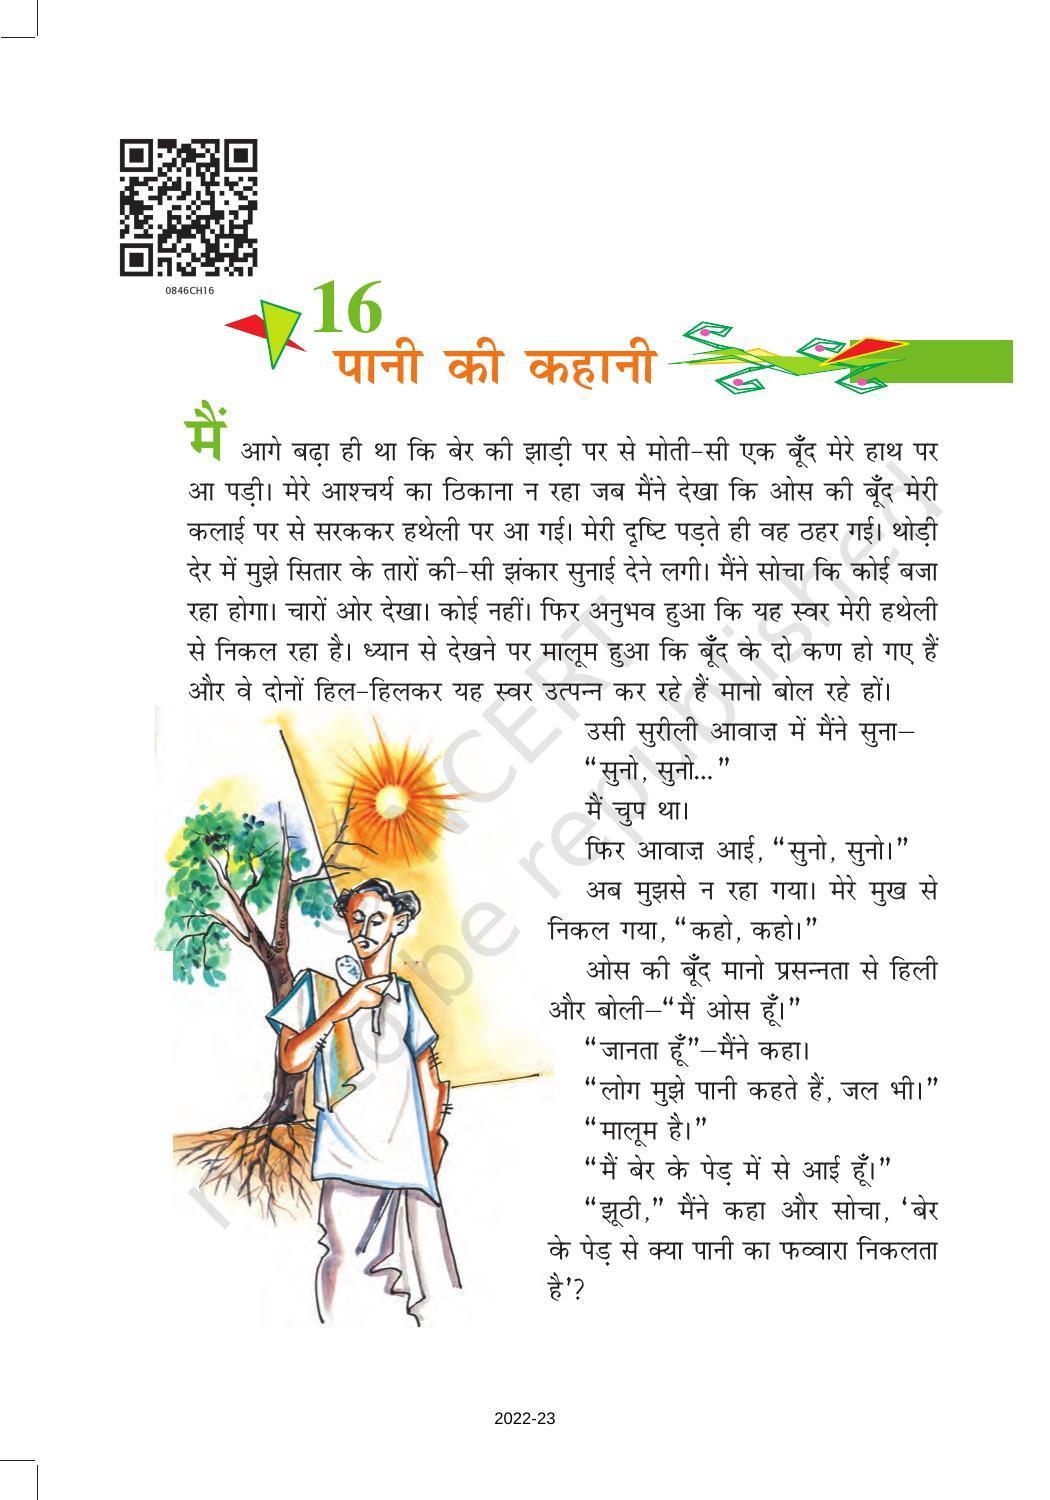 NCERT Book for Class 8 Hindi Vasant Chapter 16 पानी की कहानी - Page 1